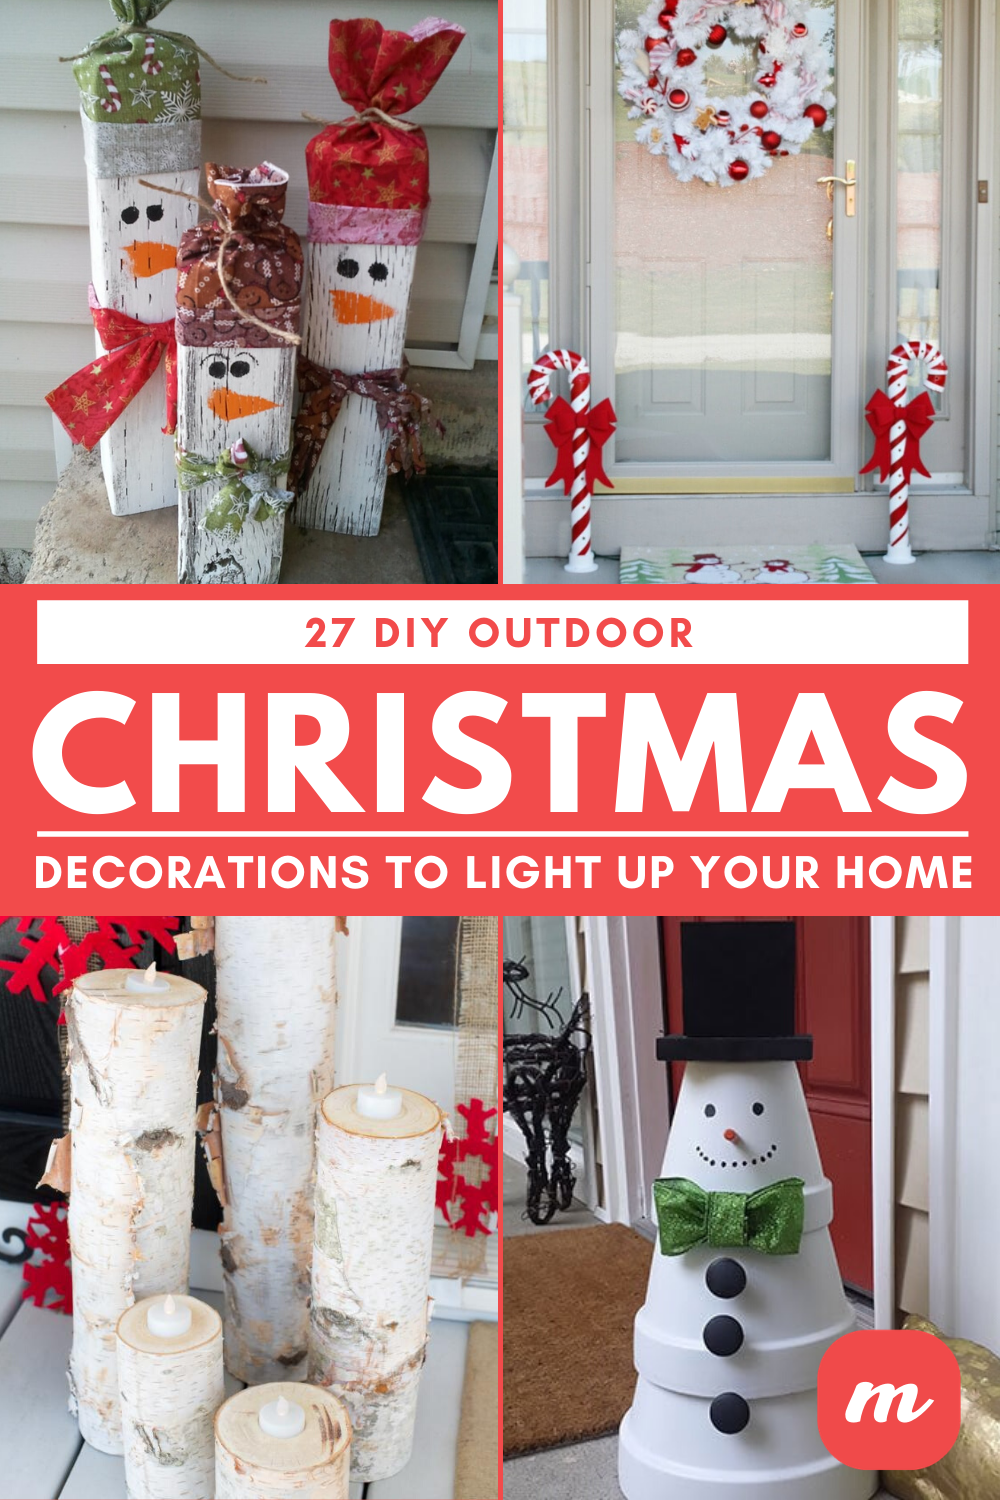 27 DIY Outdoor Christmas Decorations to Light Up Your Home - 27 DIY Outdoor Christmas Decorations to Light Up Your Home -   19 dollar tree christmas diy decorations outdoor ideas